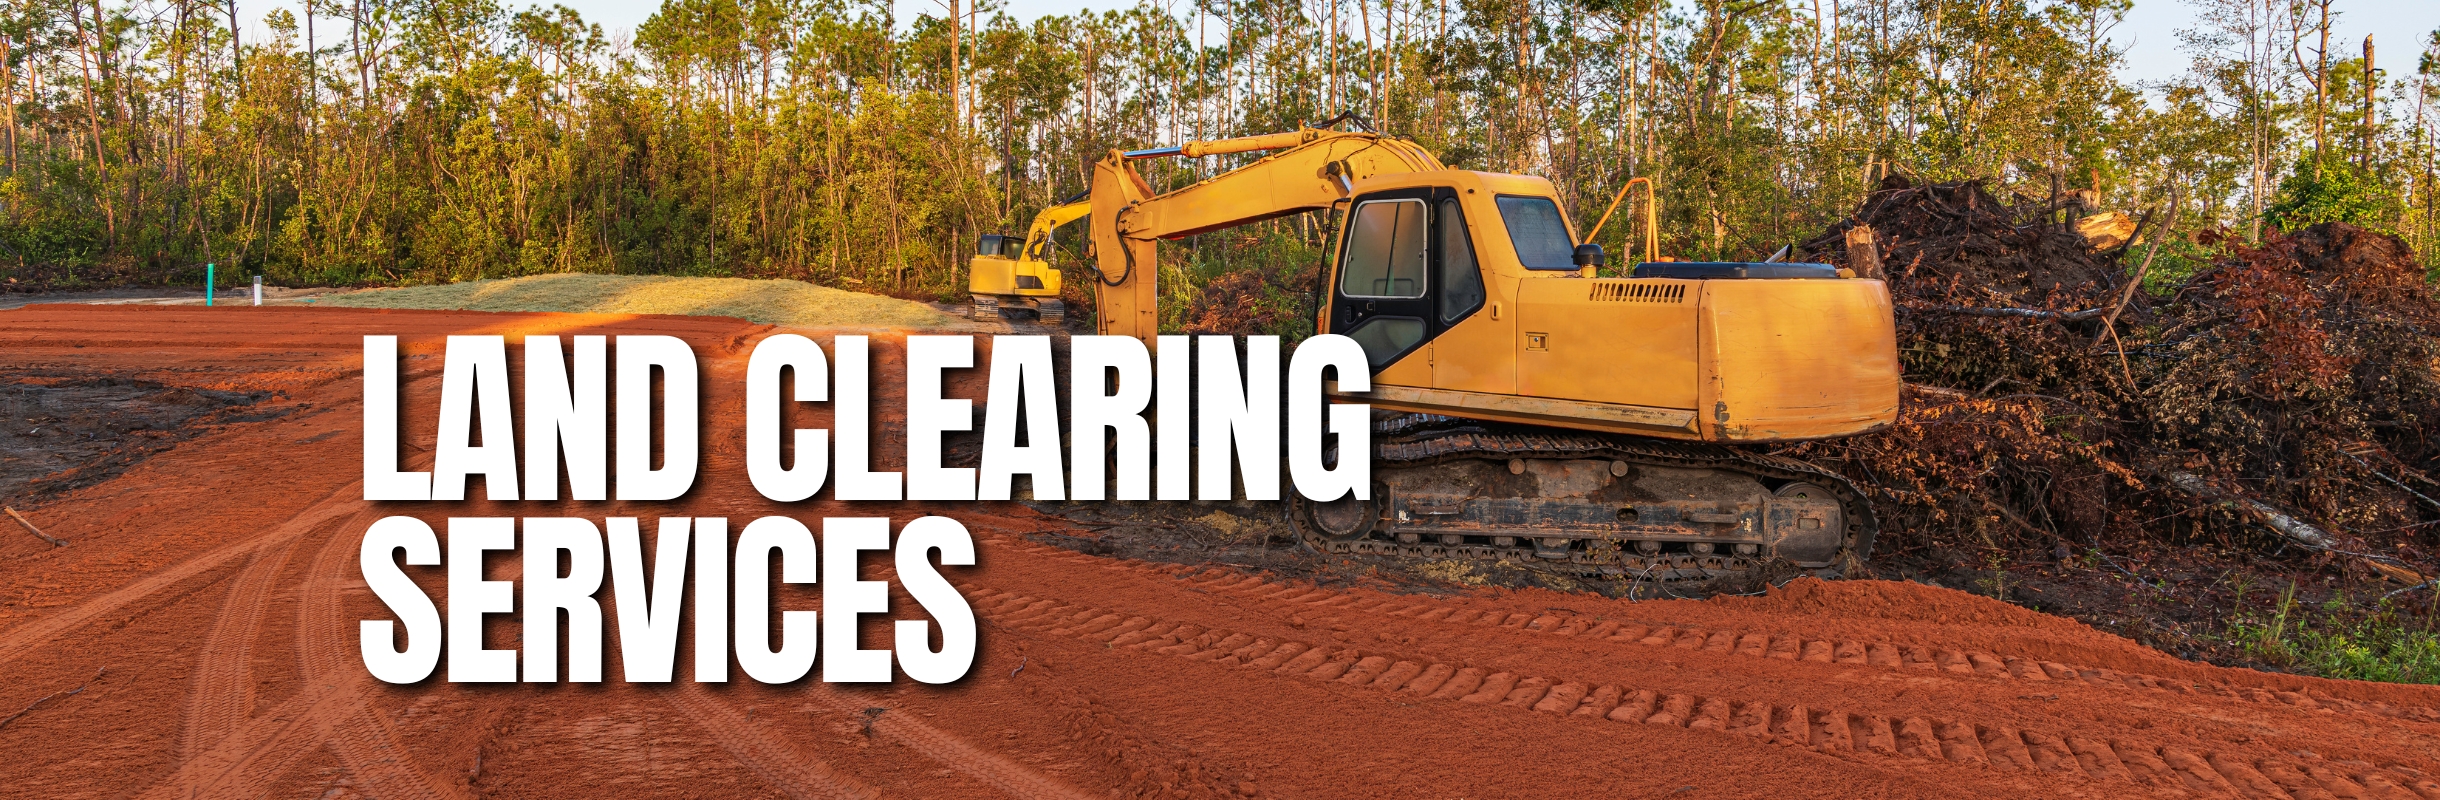 Land-Clearing-Services